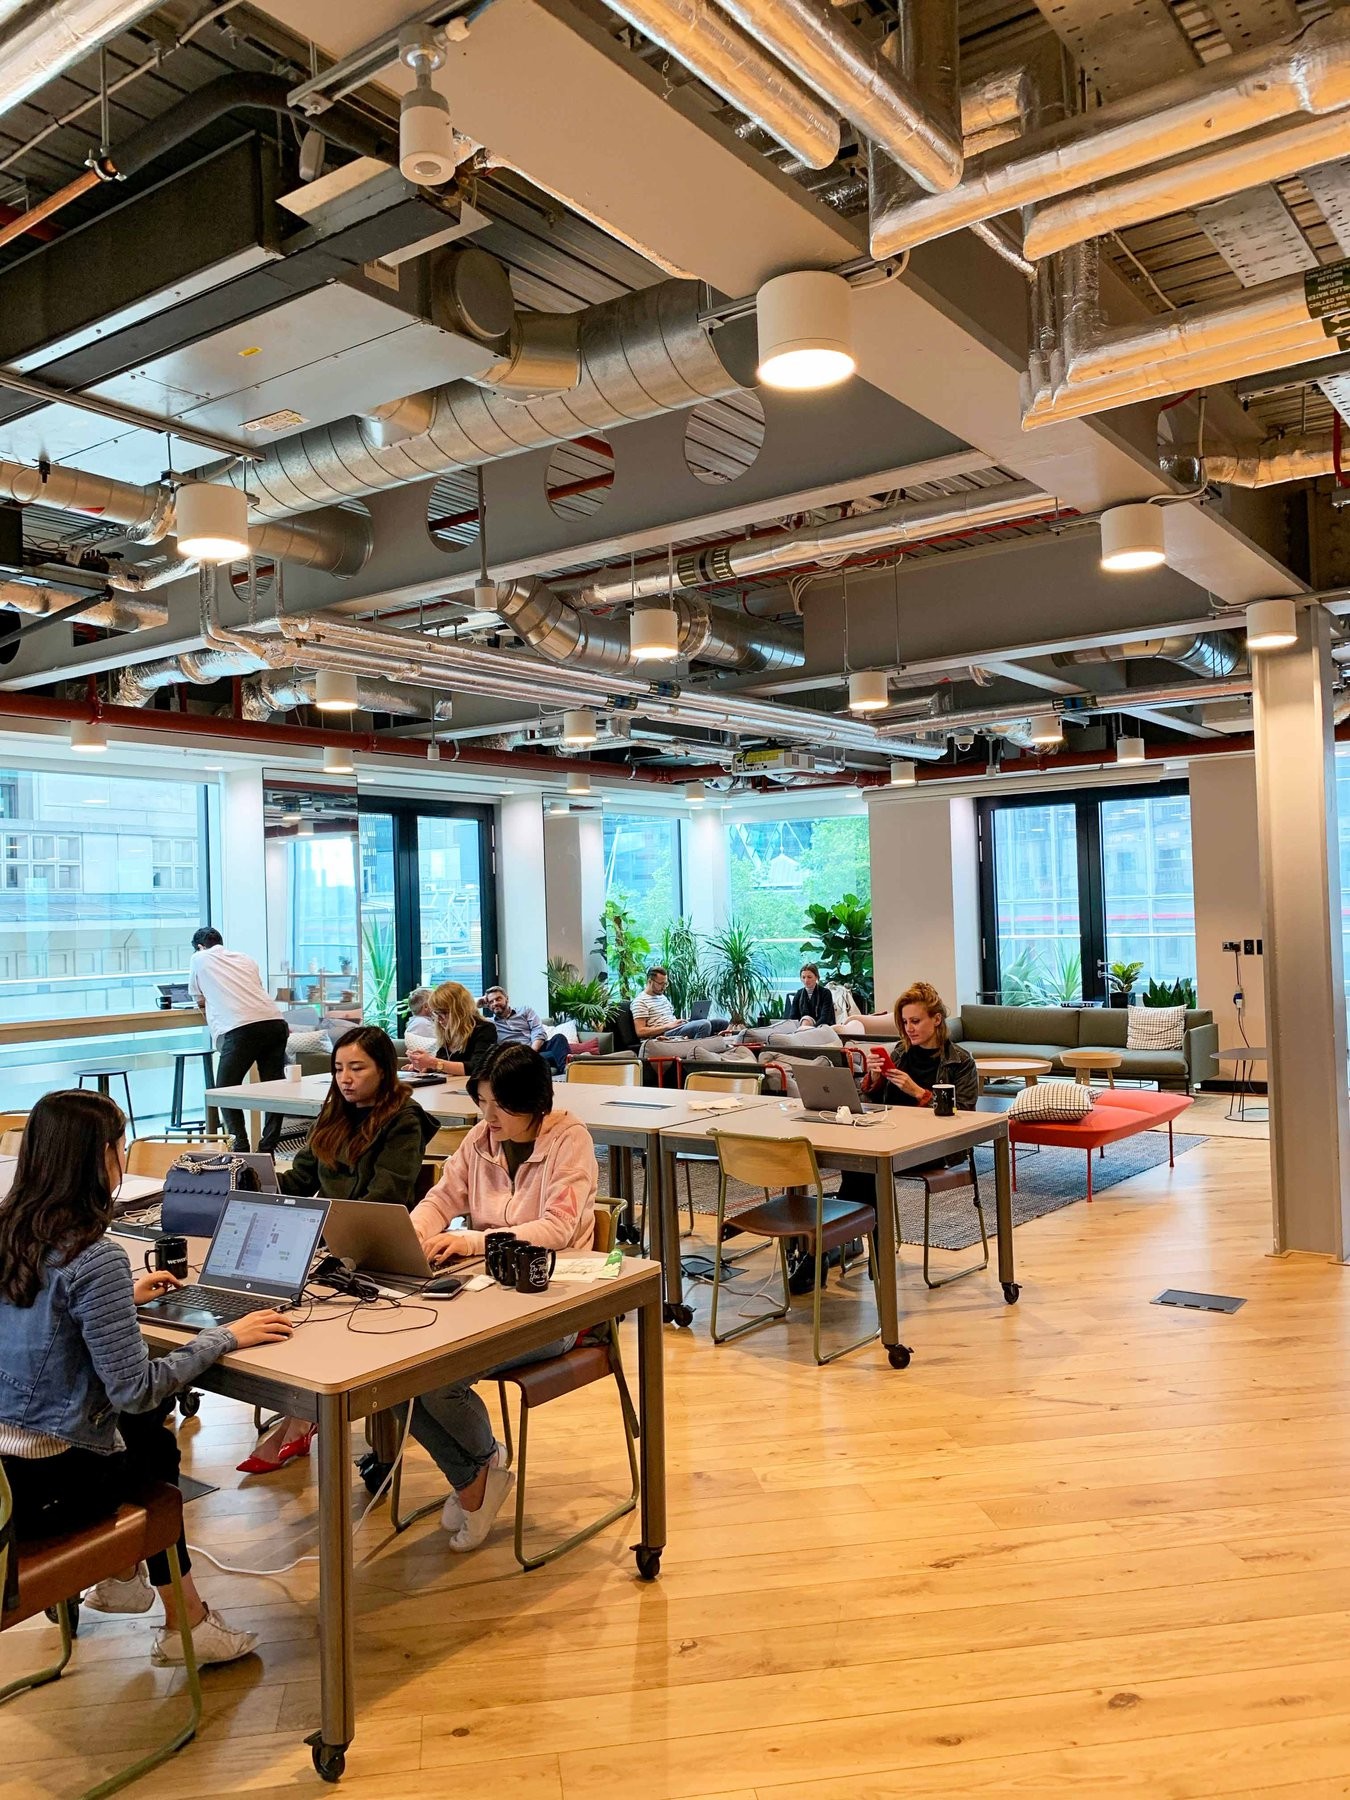 Employees in an open workspace layout with exposed ceilings